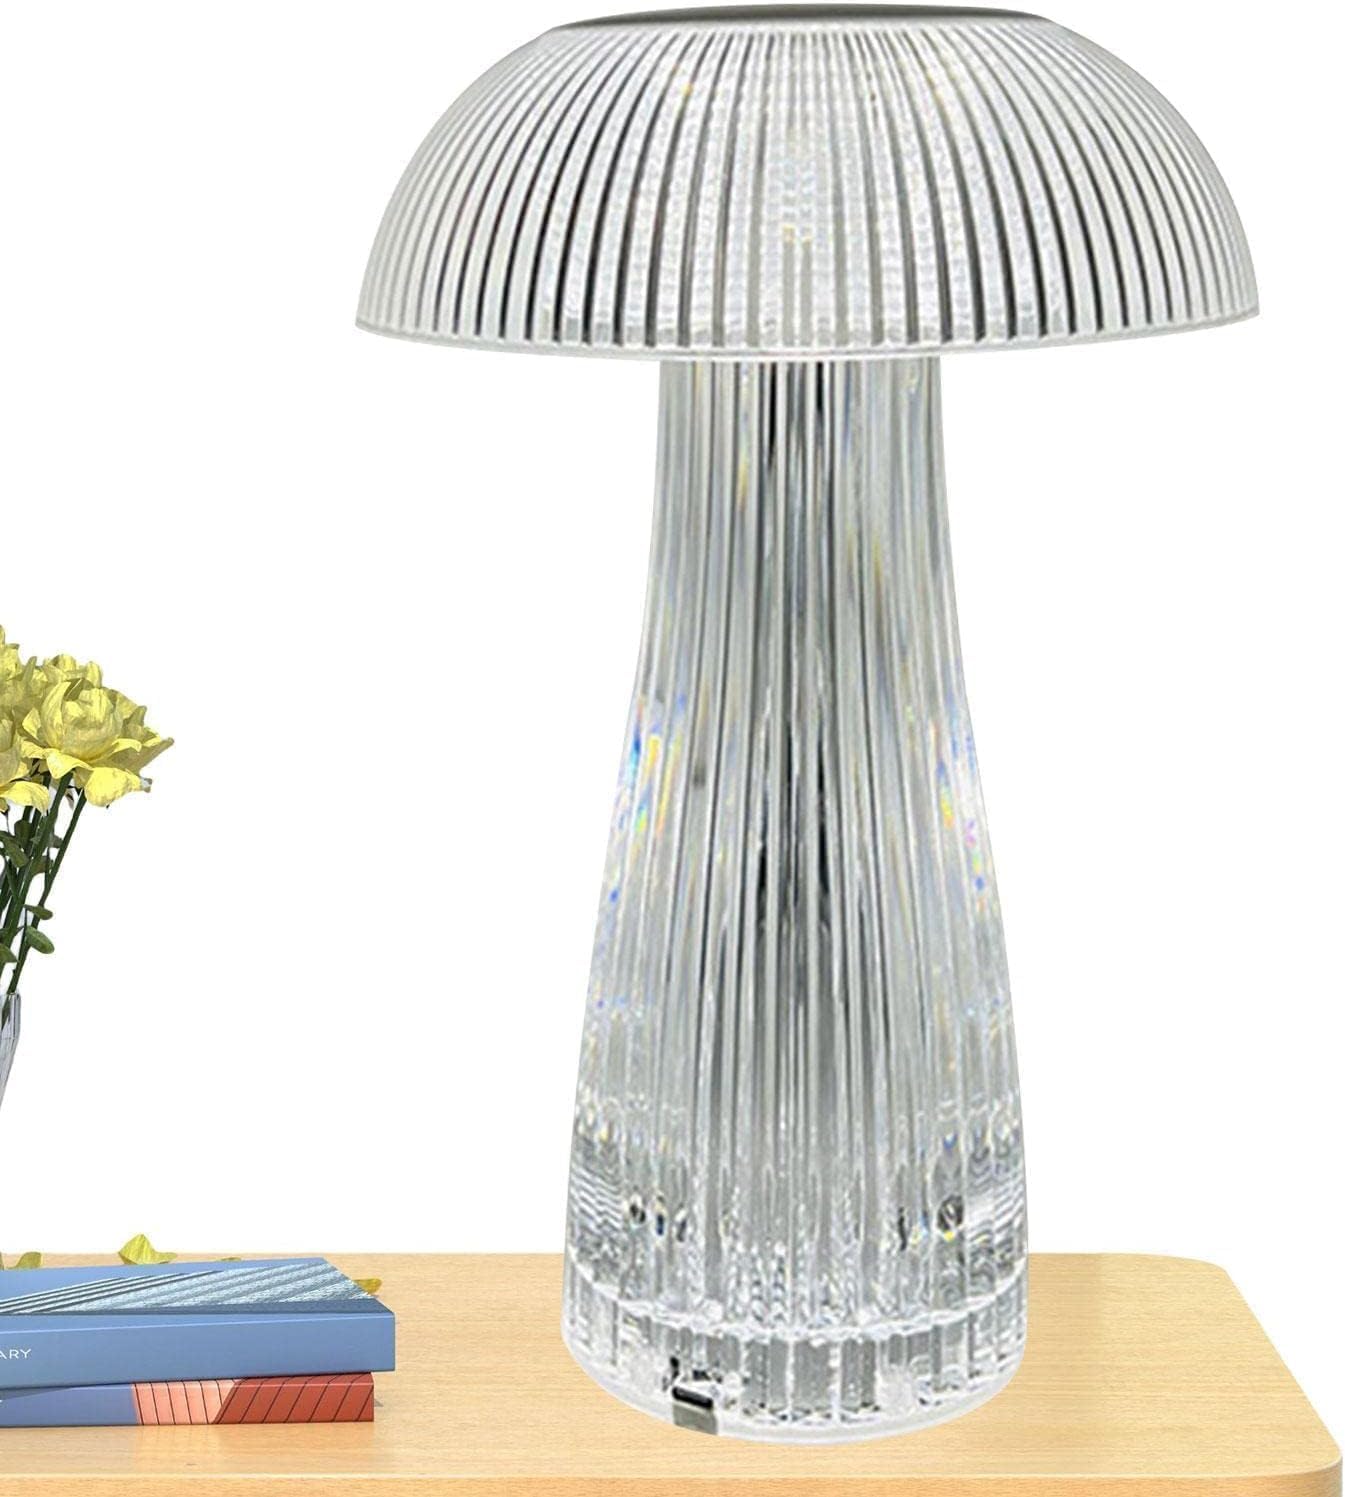 Mushroom Style Crystal Touch Table Lamp 3 Colors Rechargeable Table Lamp with Touch Control - Buy Mushroom Style Crystal Touch Table Lamp 3 Colors Rechargeable Table Lamp with Touch Control in Dubai - HOCC Dubai - Baby playground outdoor - Shop baby prod